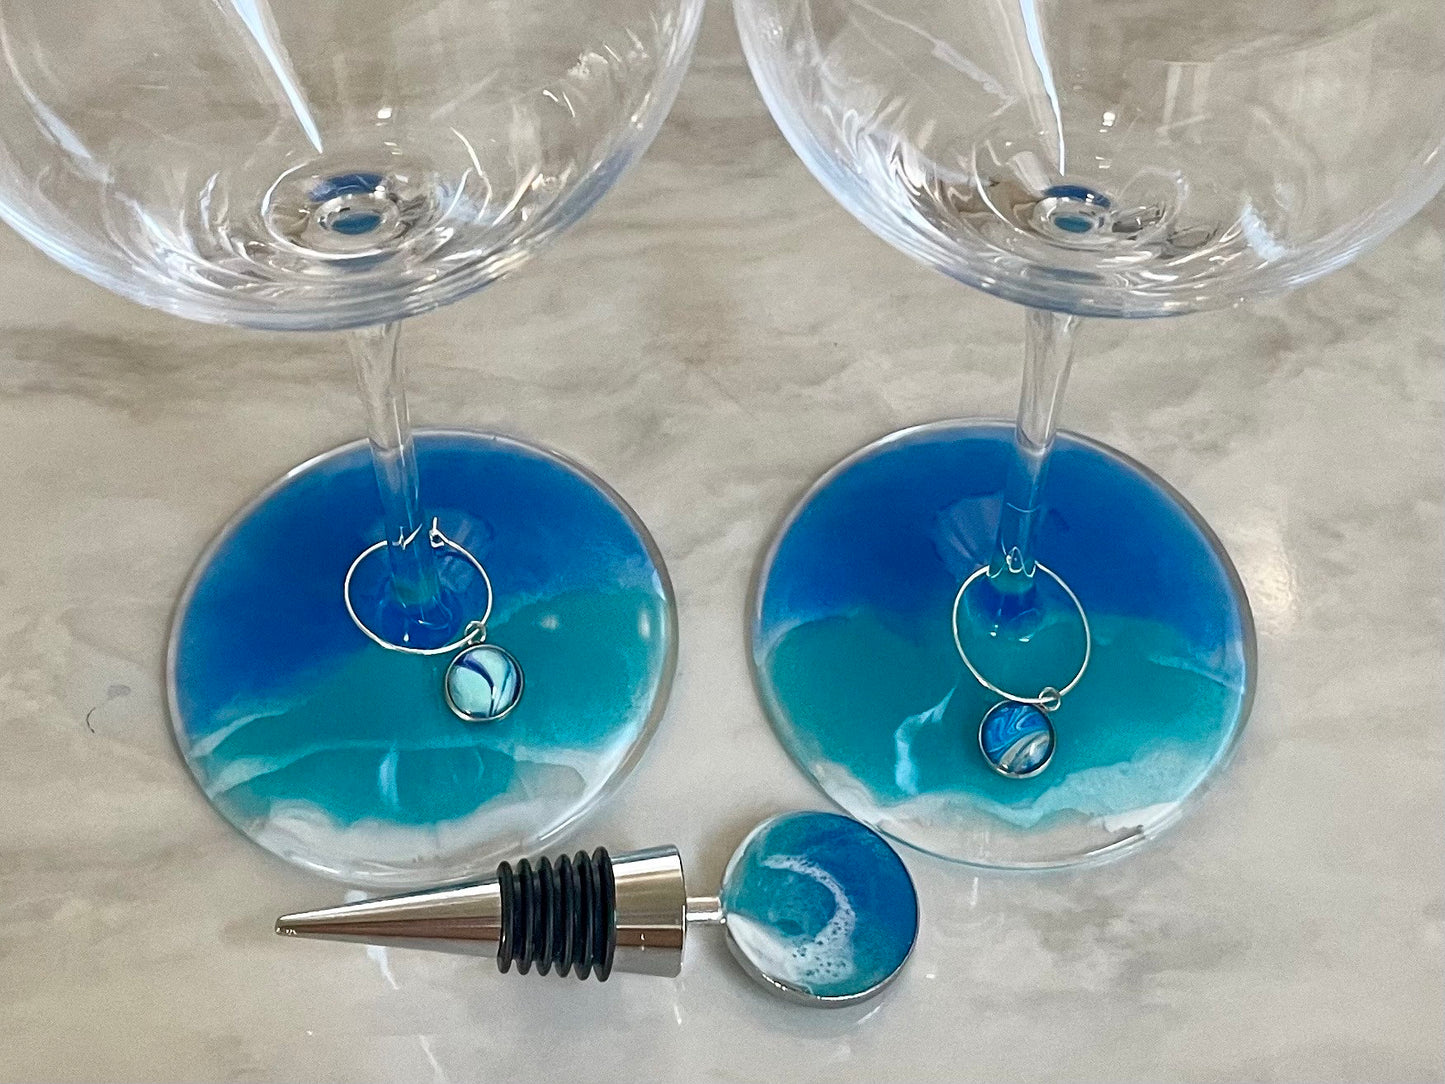 Resin Ocean Wave Serving Tray Set, Wine & Cheese Lover Gift, Housewarming Gift, Realtor Closing Gift, Beach Lover Gift, Beach House Decor